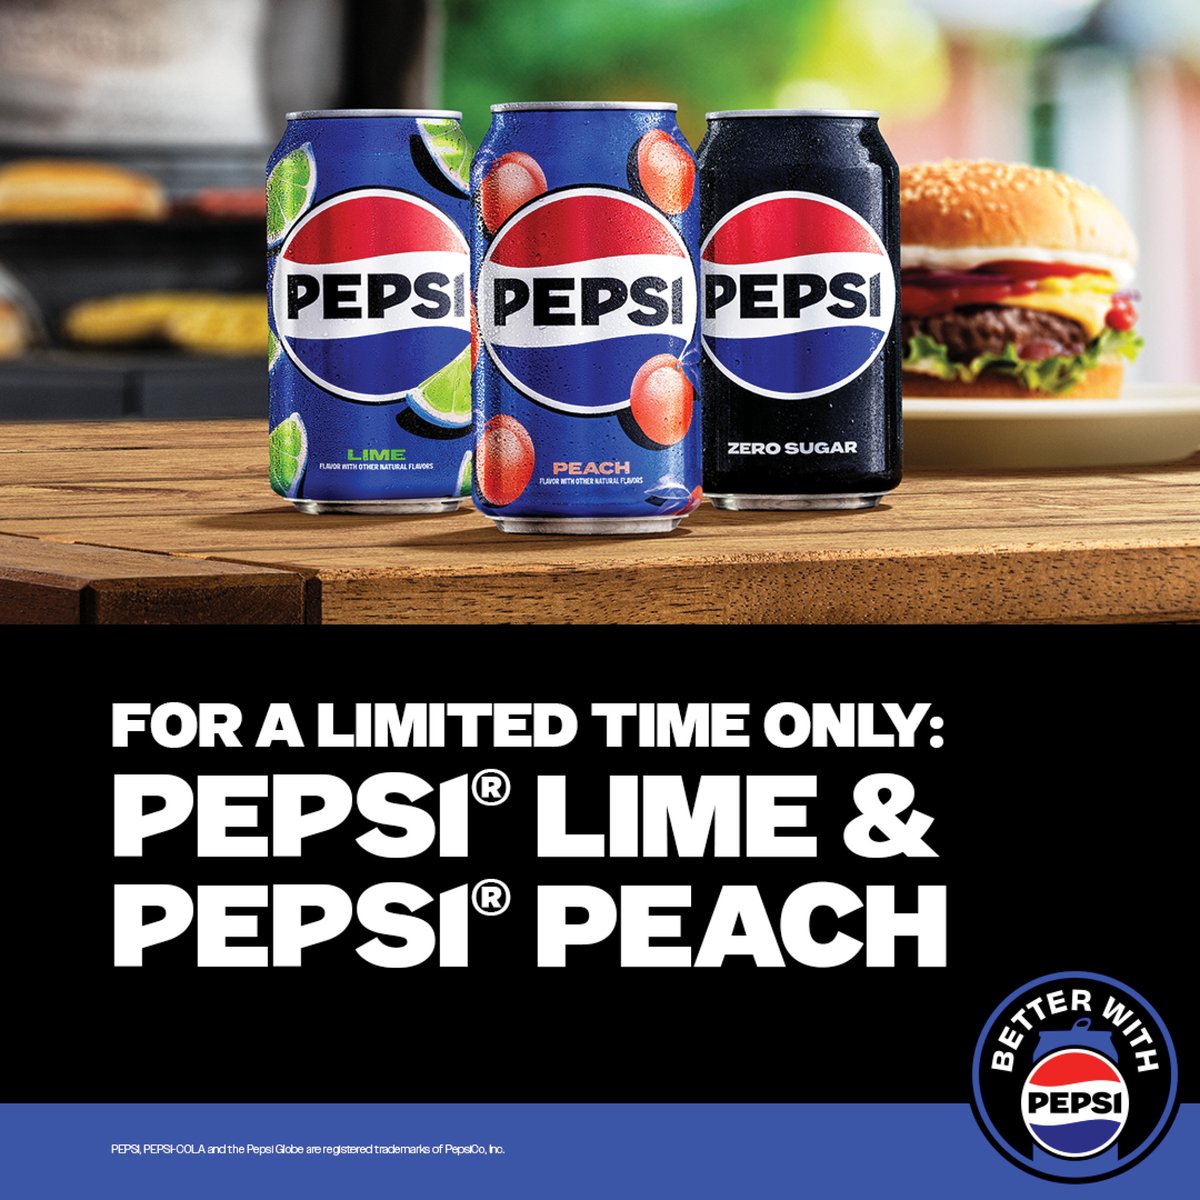 Time to put out a couple extra coasters at your BBQ, 'cause Pepsi Lime and Pepsi Peach have officially arrived! See for yourself how the tangy citrus bite of lime and plush sweetness of a ripe peach pair perfectly with the smoky, savory flavors from the grill.